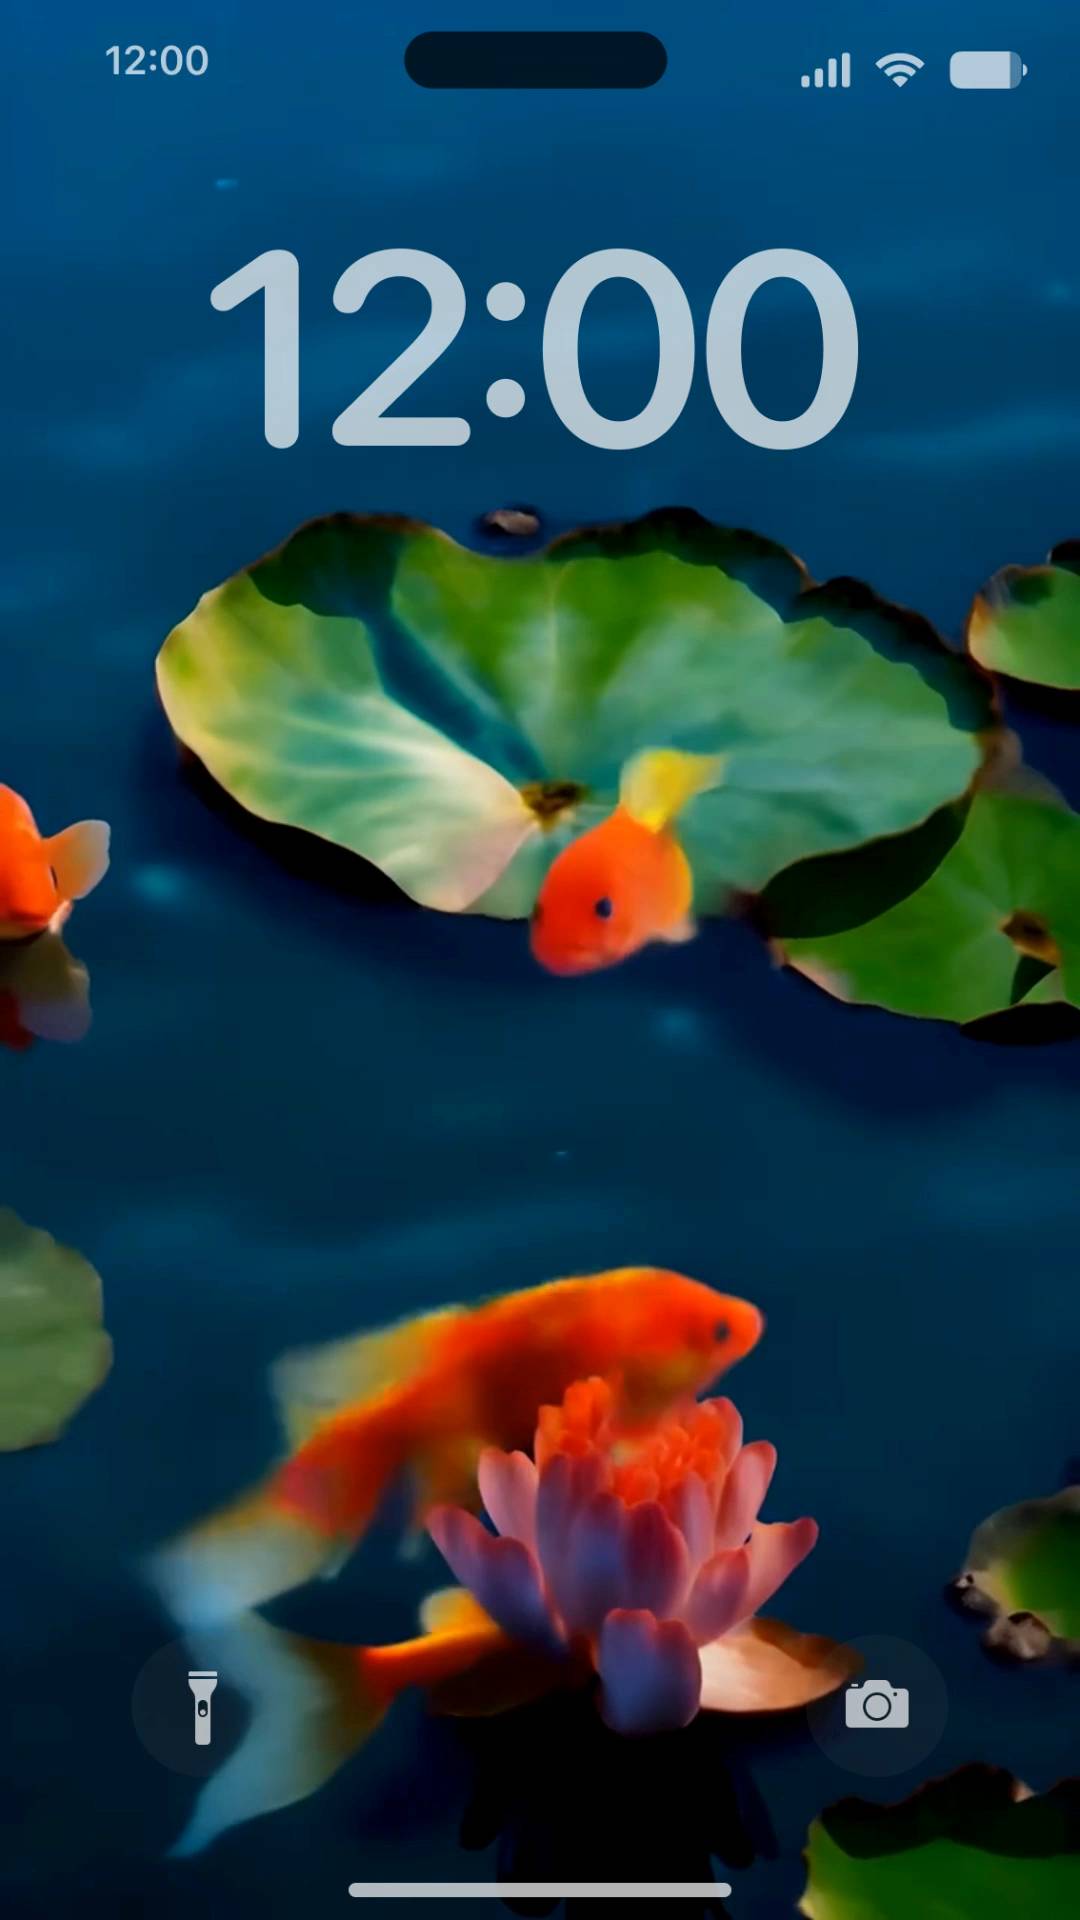 Mysterious weired Gold fish pond Live Wallpaper[aH6nR21bZRrFAobP7pYG]